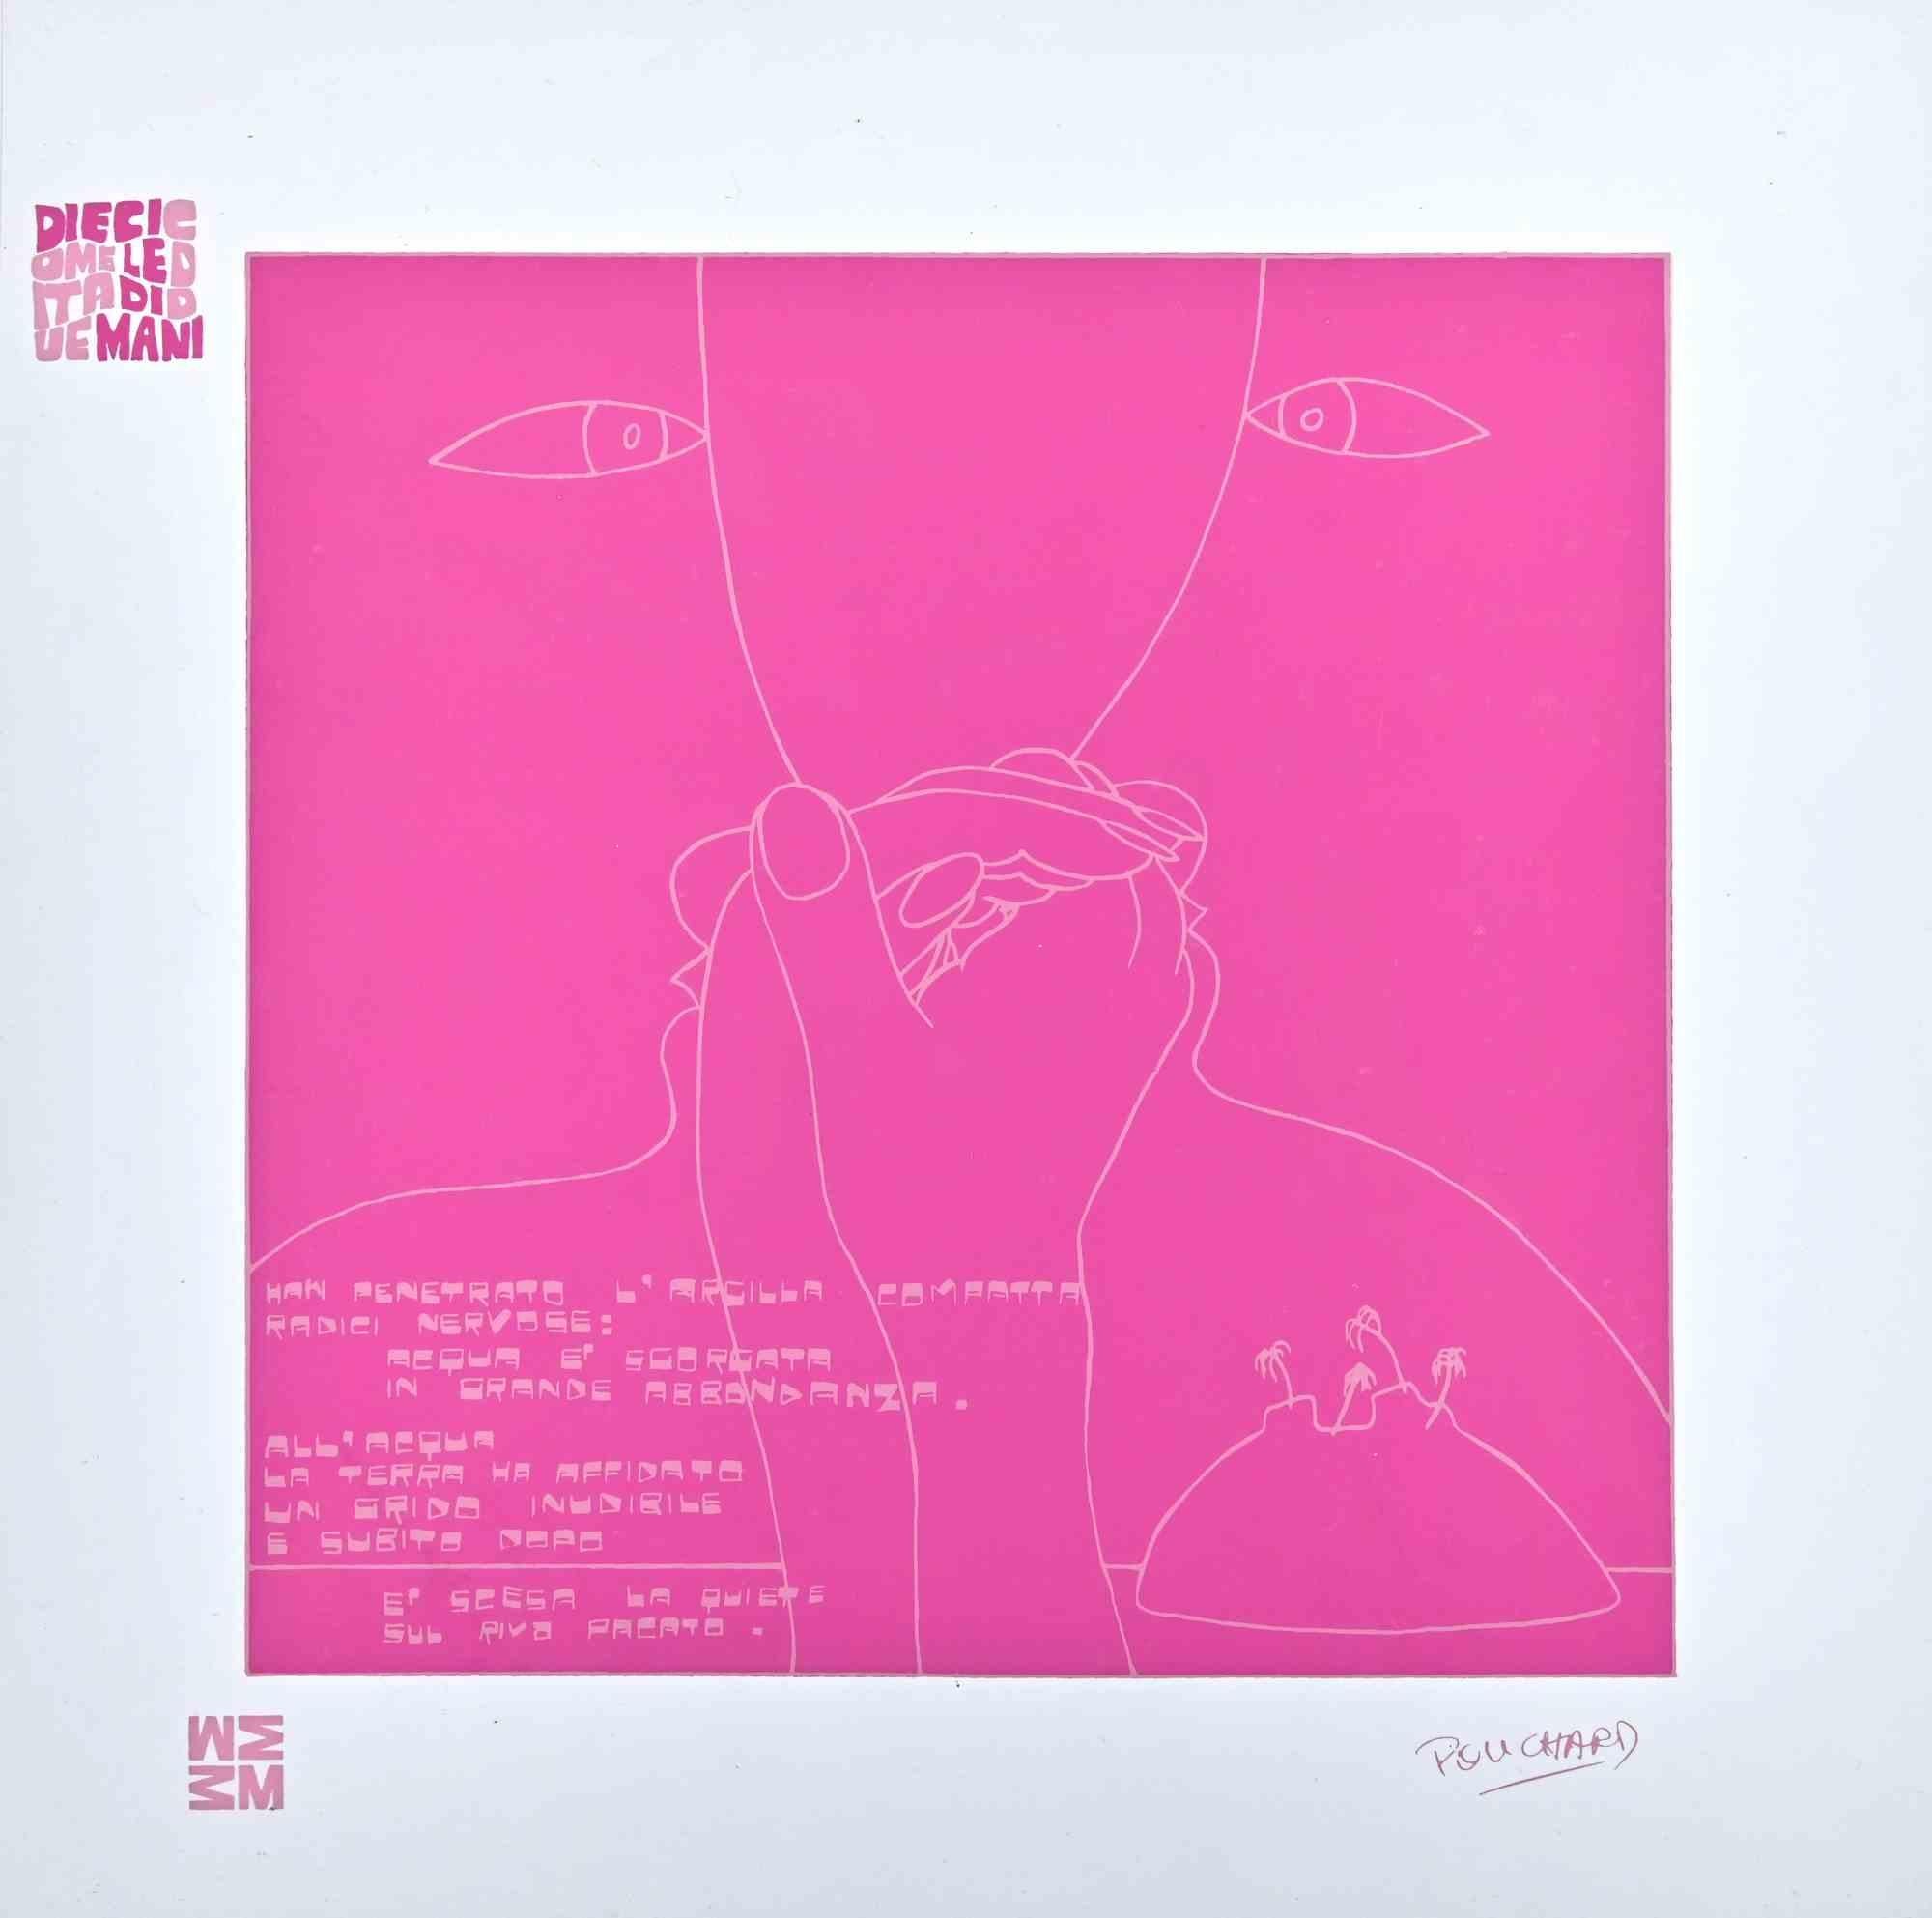 Argilla compatta - Diecicomeleditadiduemani is a color silk-screen print on acetates, realized in  1973  by the artist  Ennio Pouchard  (1928).

Signed on plate  on the lower right.

From the porfolio " Diecicomeleditadiduemani ", containing 10